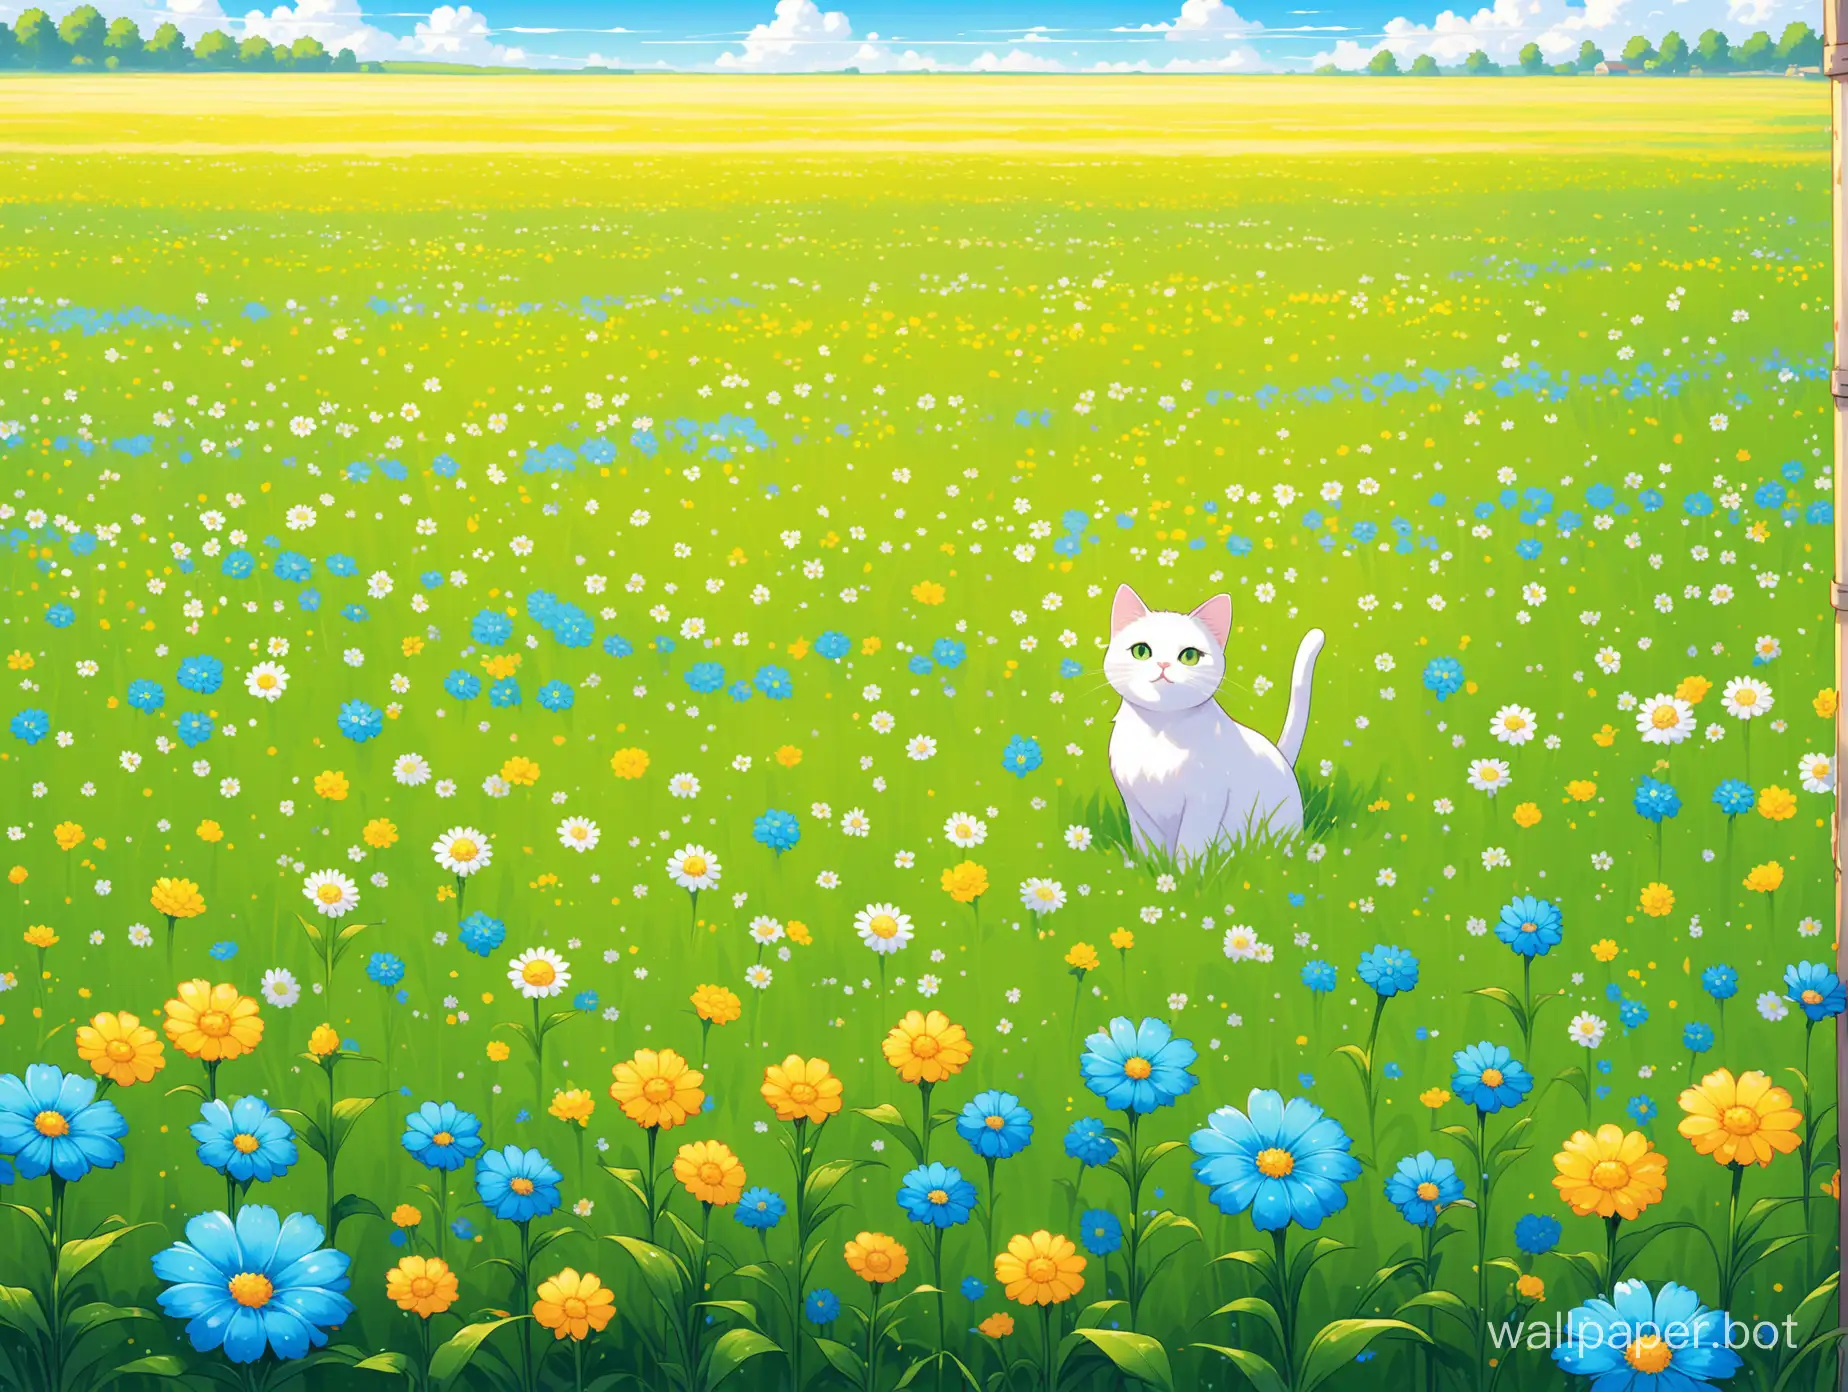 Draw a wallpaper that shows a large field with white, green, yellow, blue flowers and a cat sitting in the distance on the side of the field